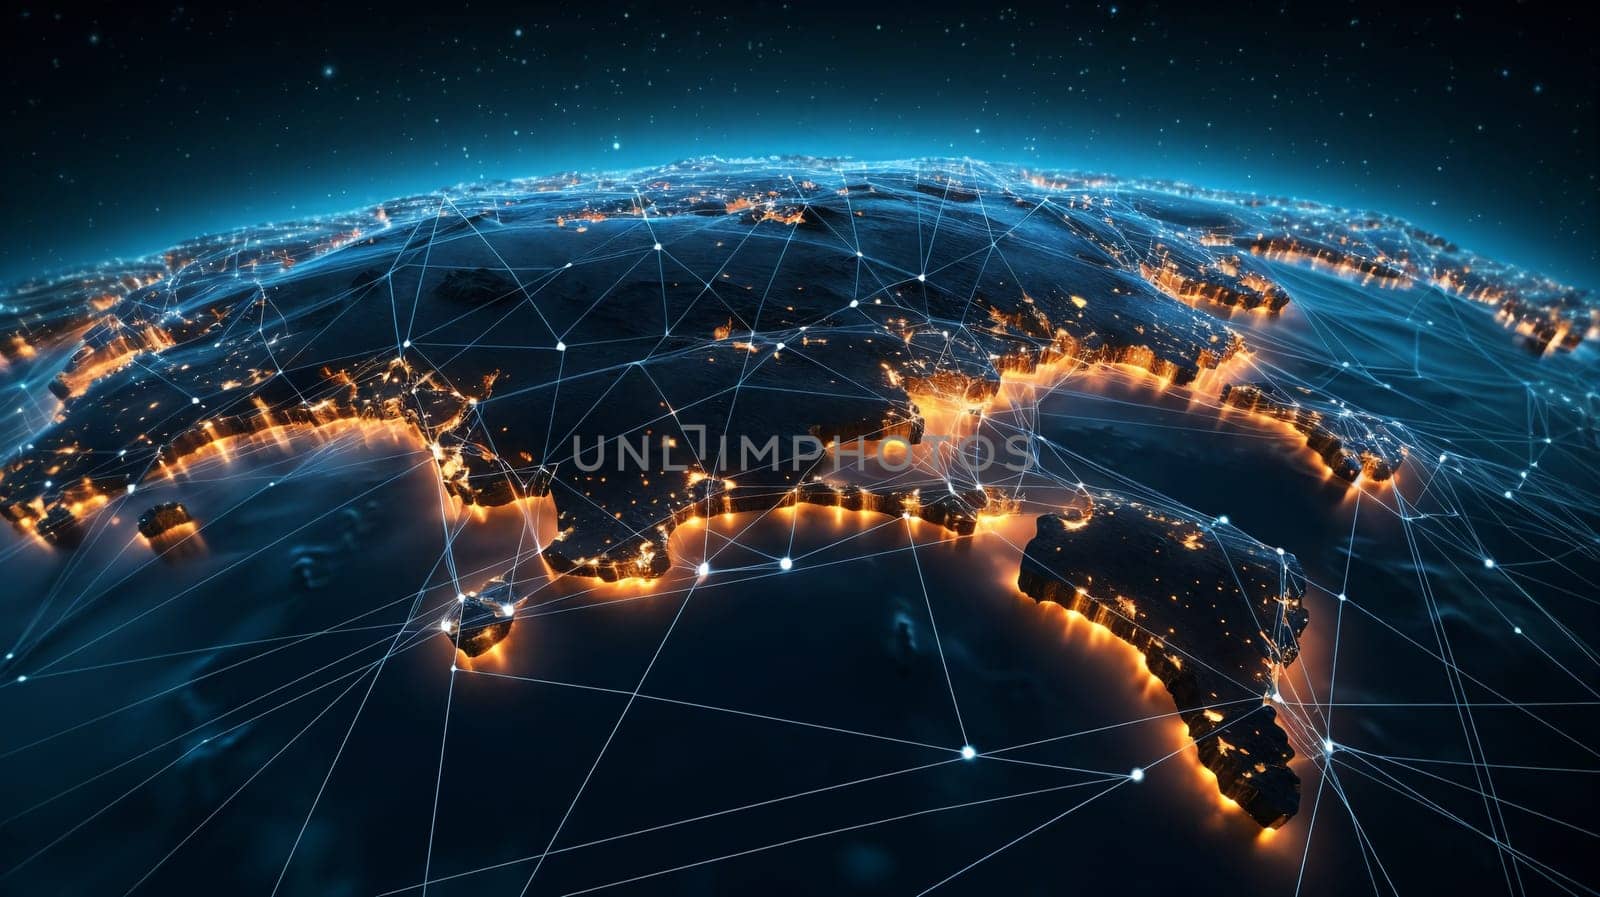 An intricate illustration depicting a global network connection, representing the interconnectivity of the internet across the world.